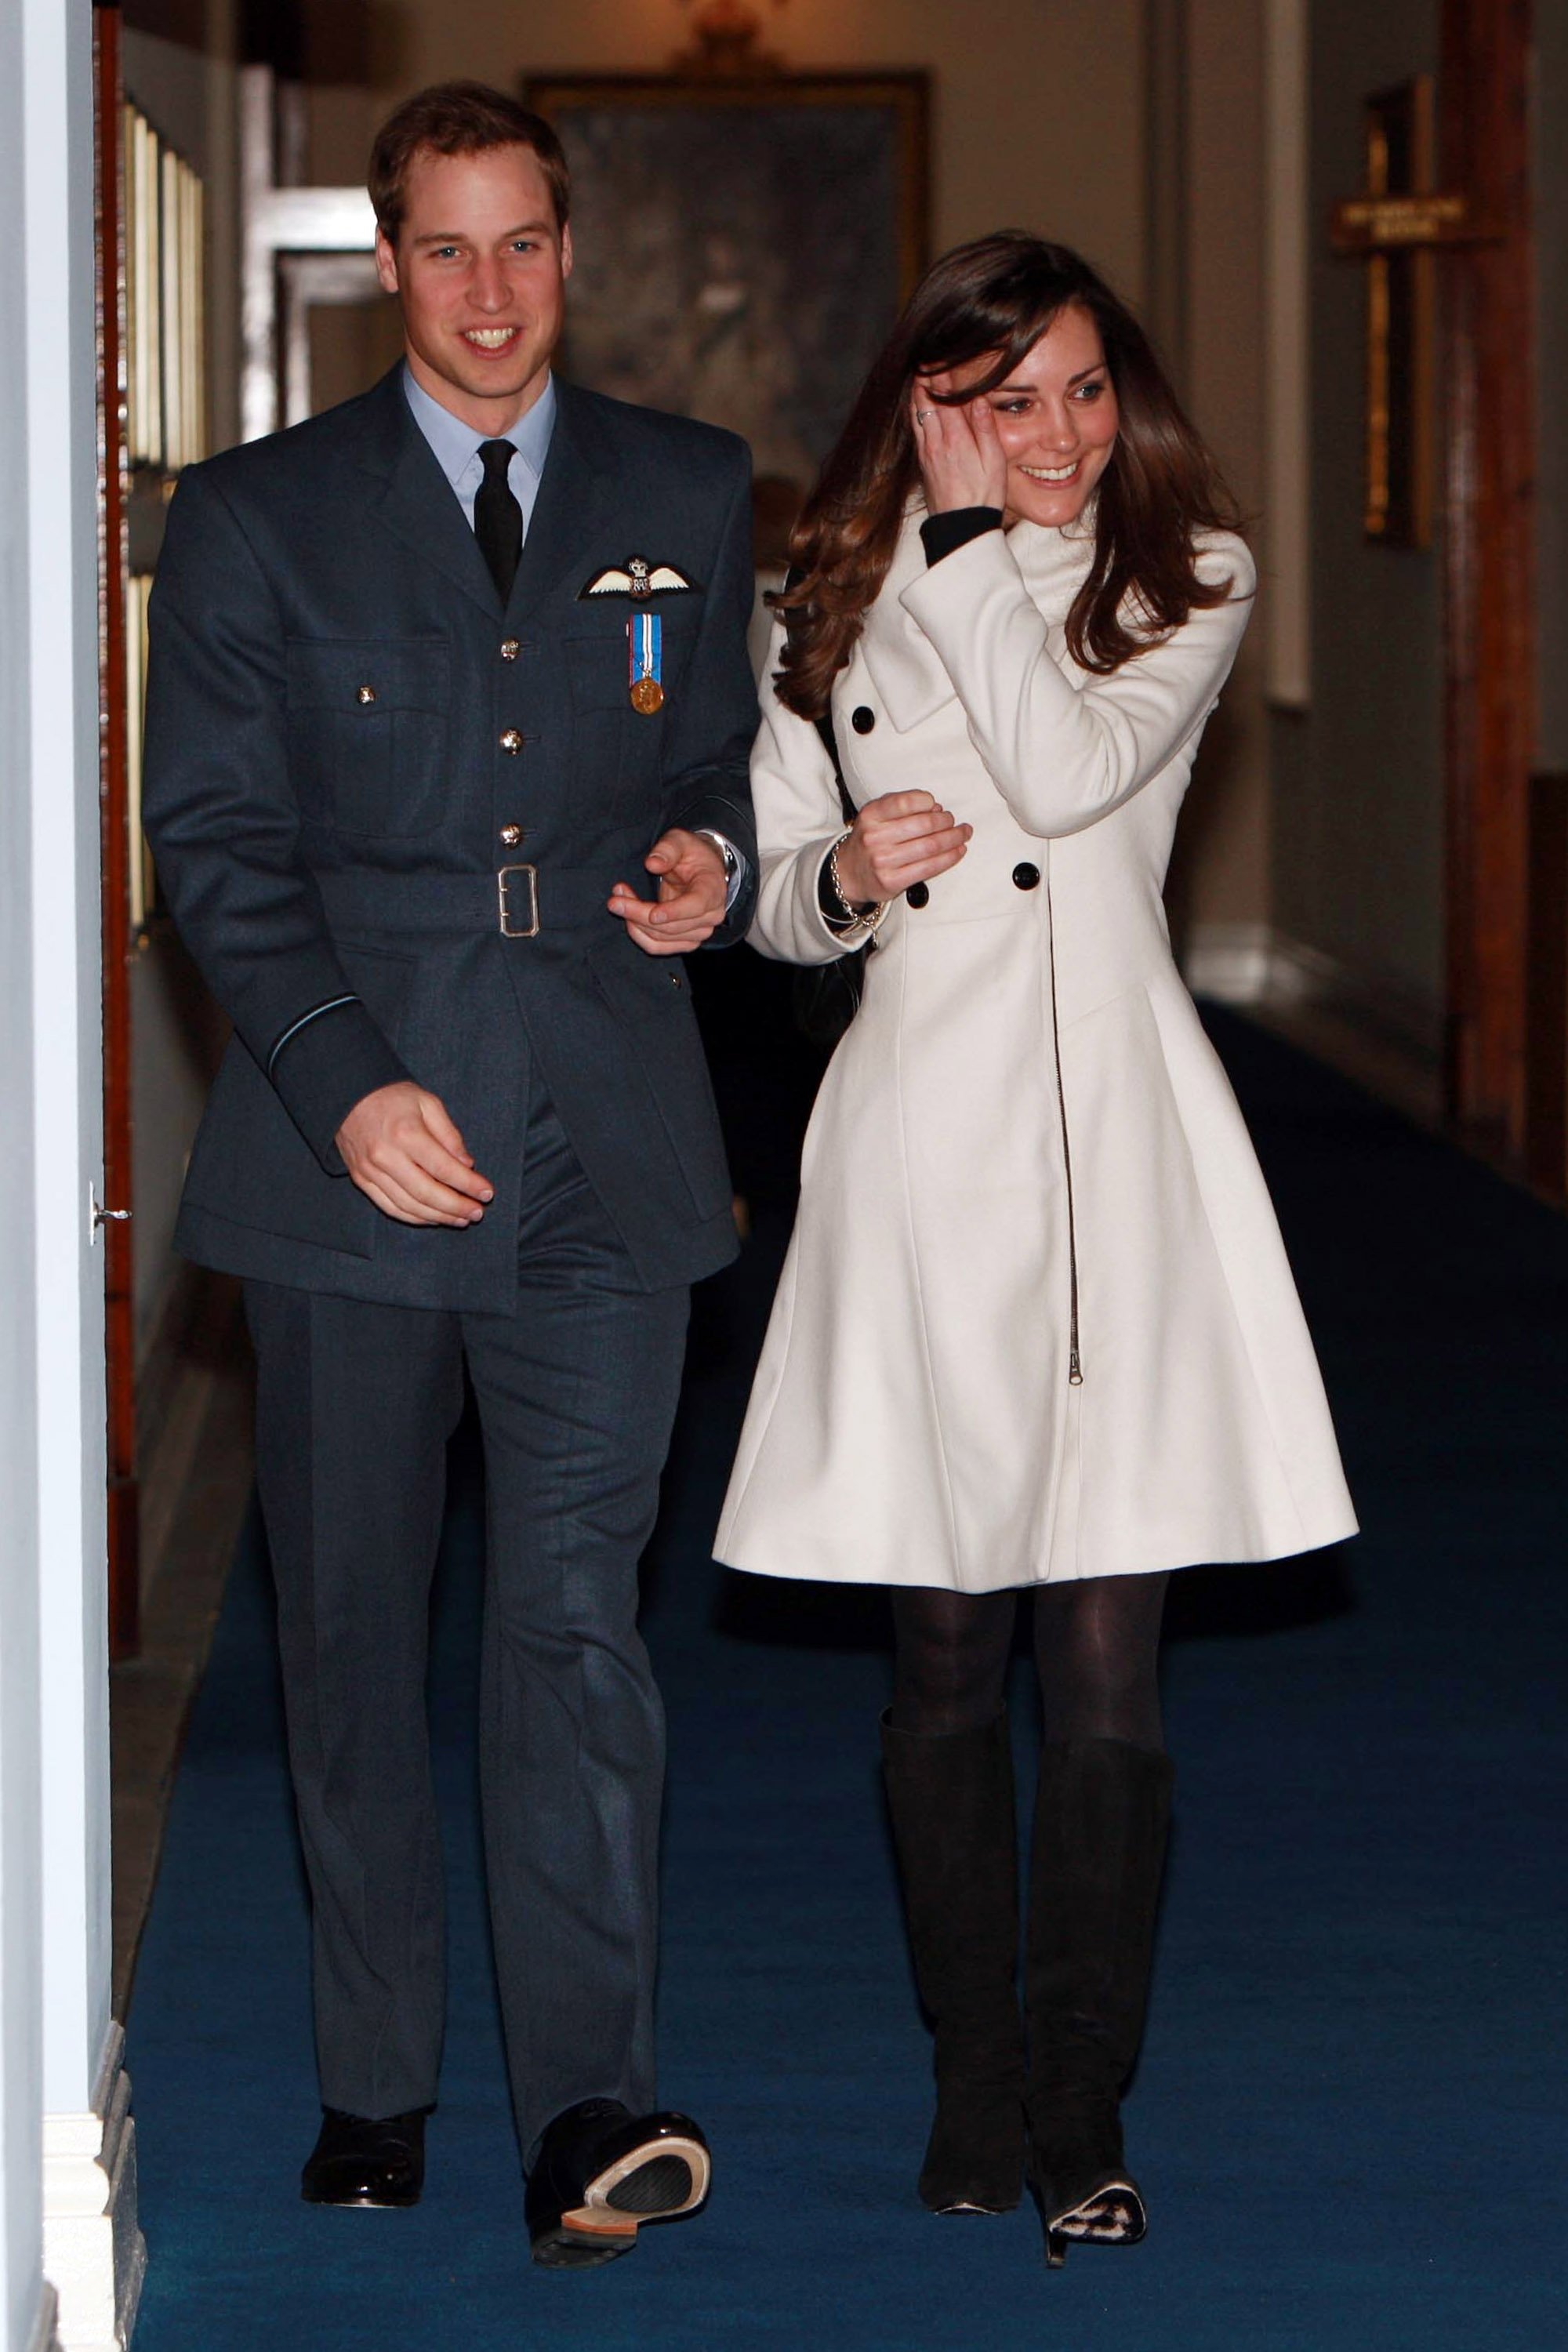 Prince William pictured walking with girlfriend Kate Middleton following his graduation ceremony at RAF Cranwell on April 11, 2008 in Cranwell, England. / Source: Getty Images